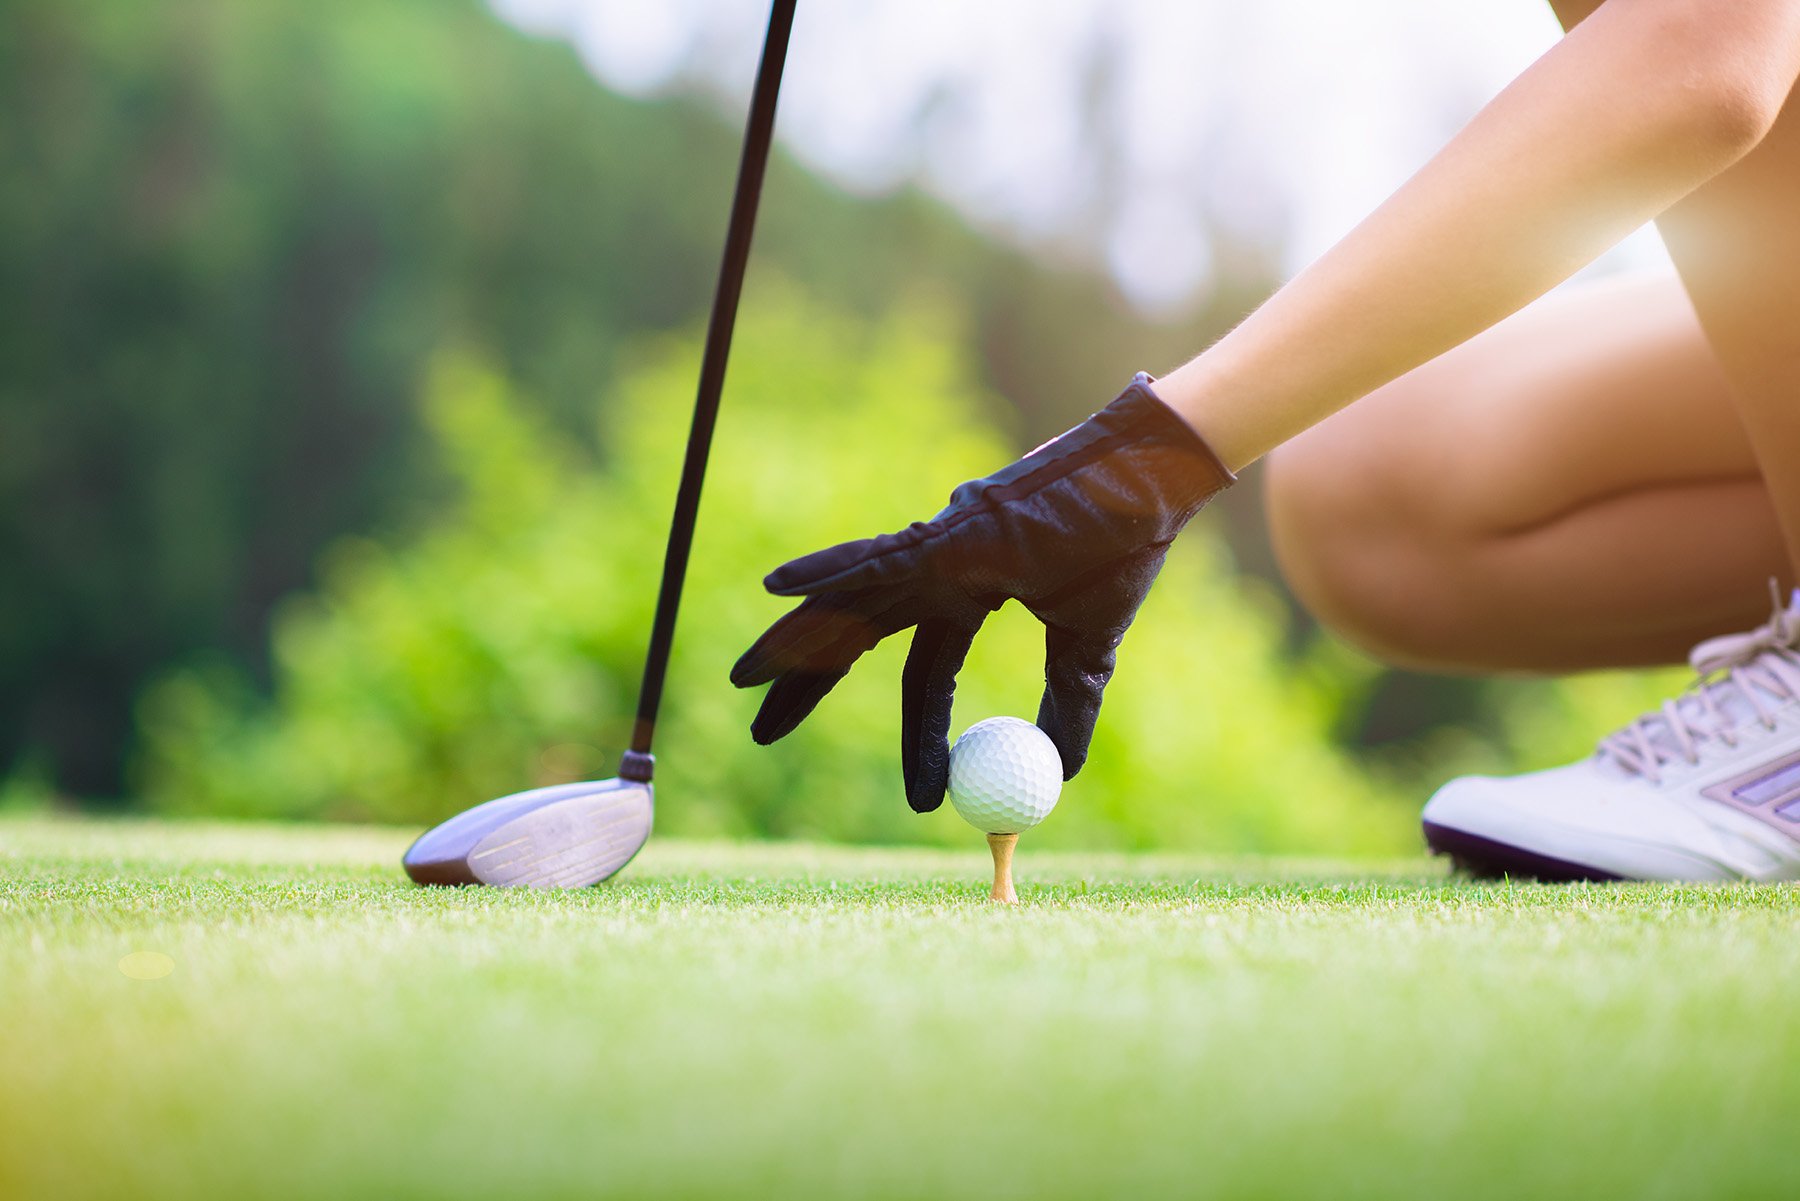 A female hand wearing a glove places a golf ball on a tee